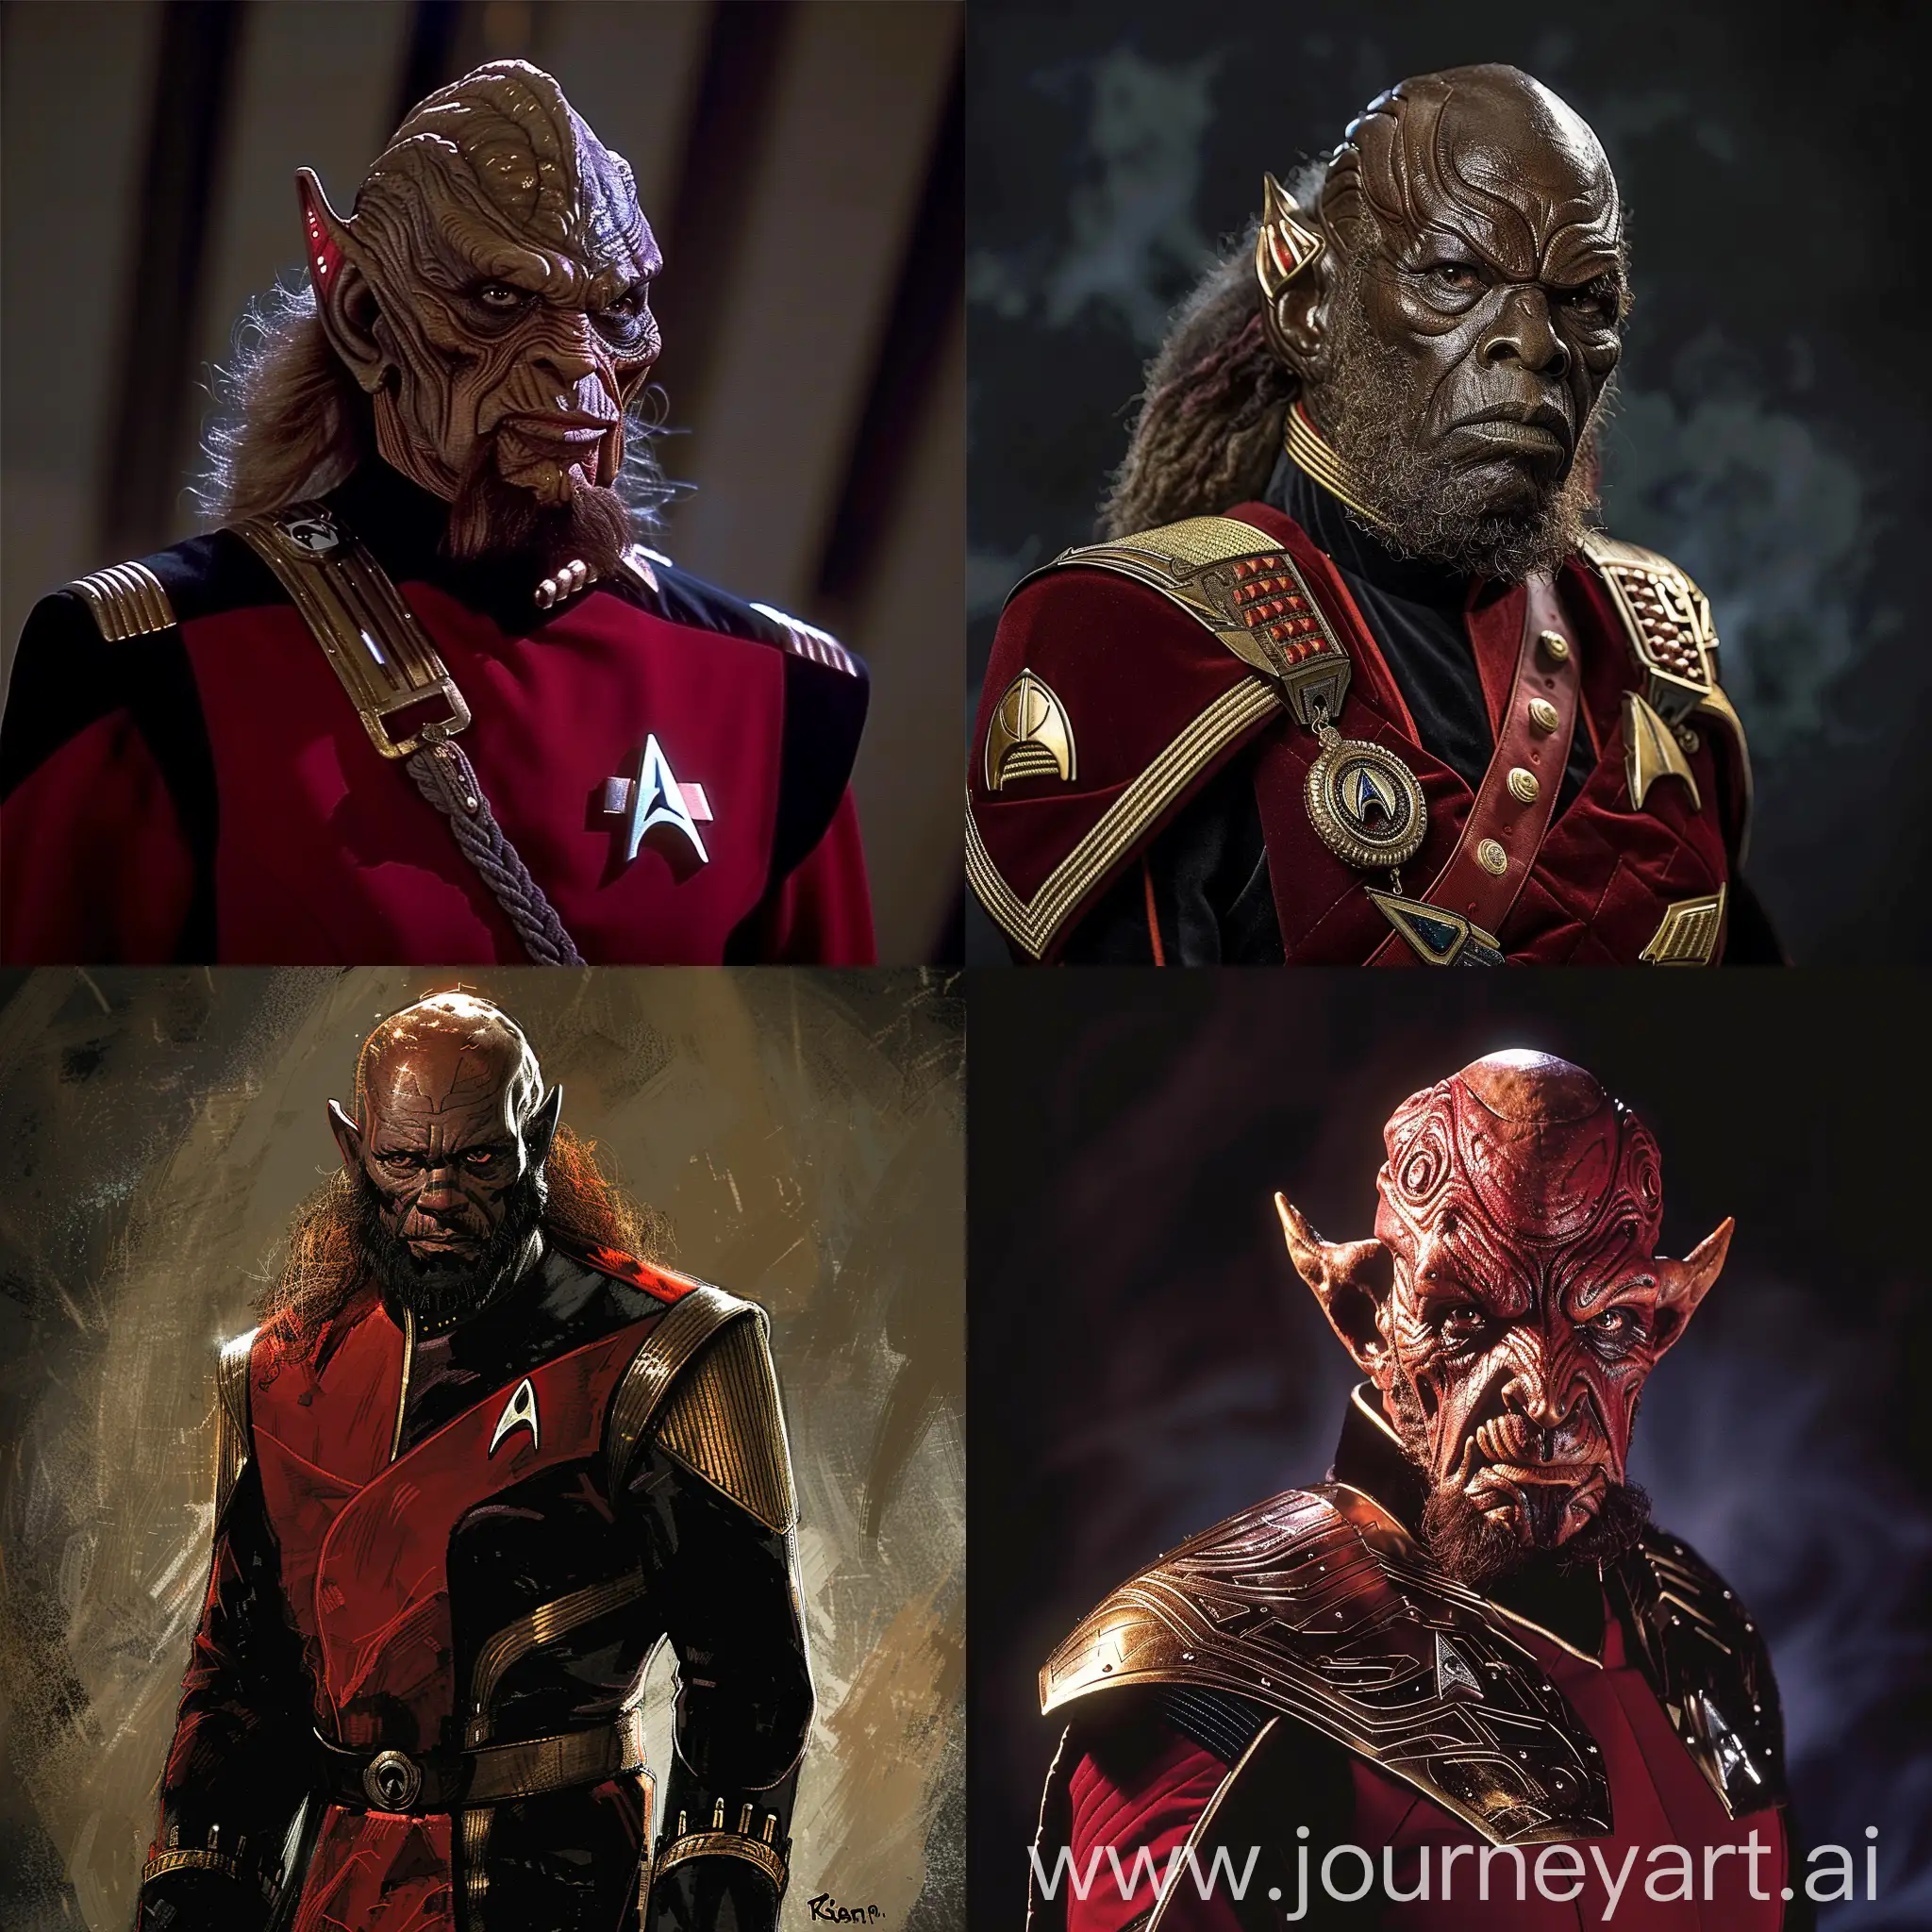 make  a picture of a Klingon in TNG uniform